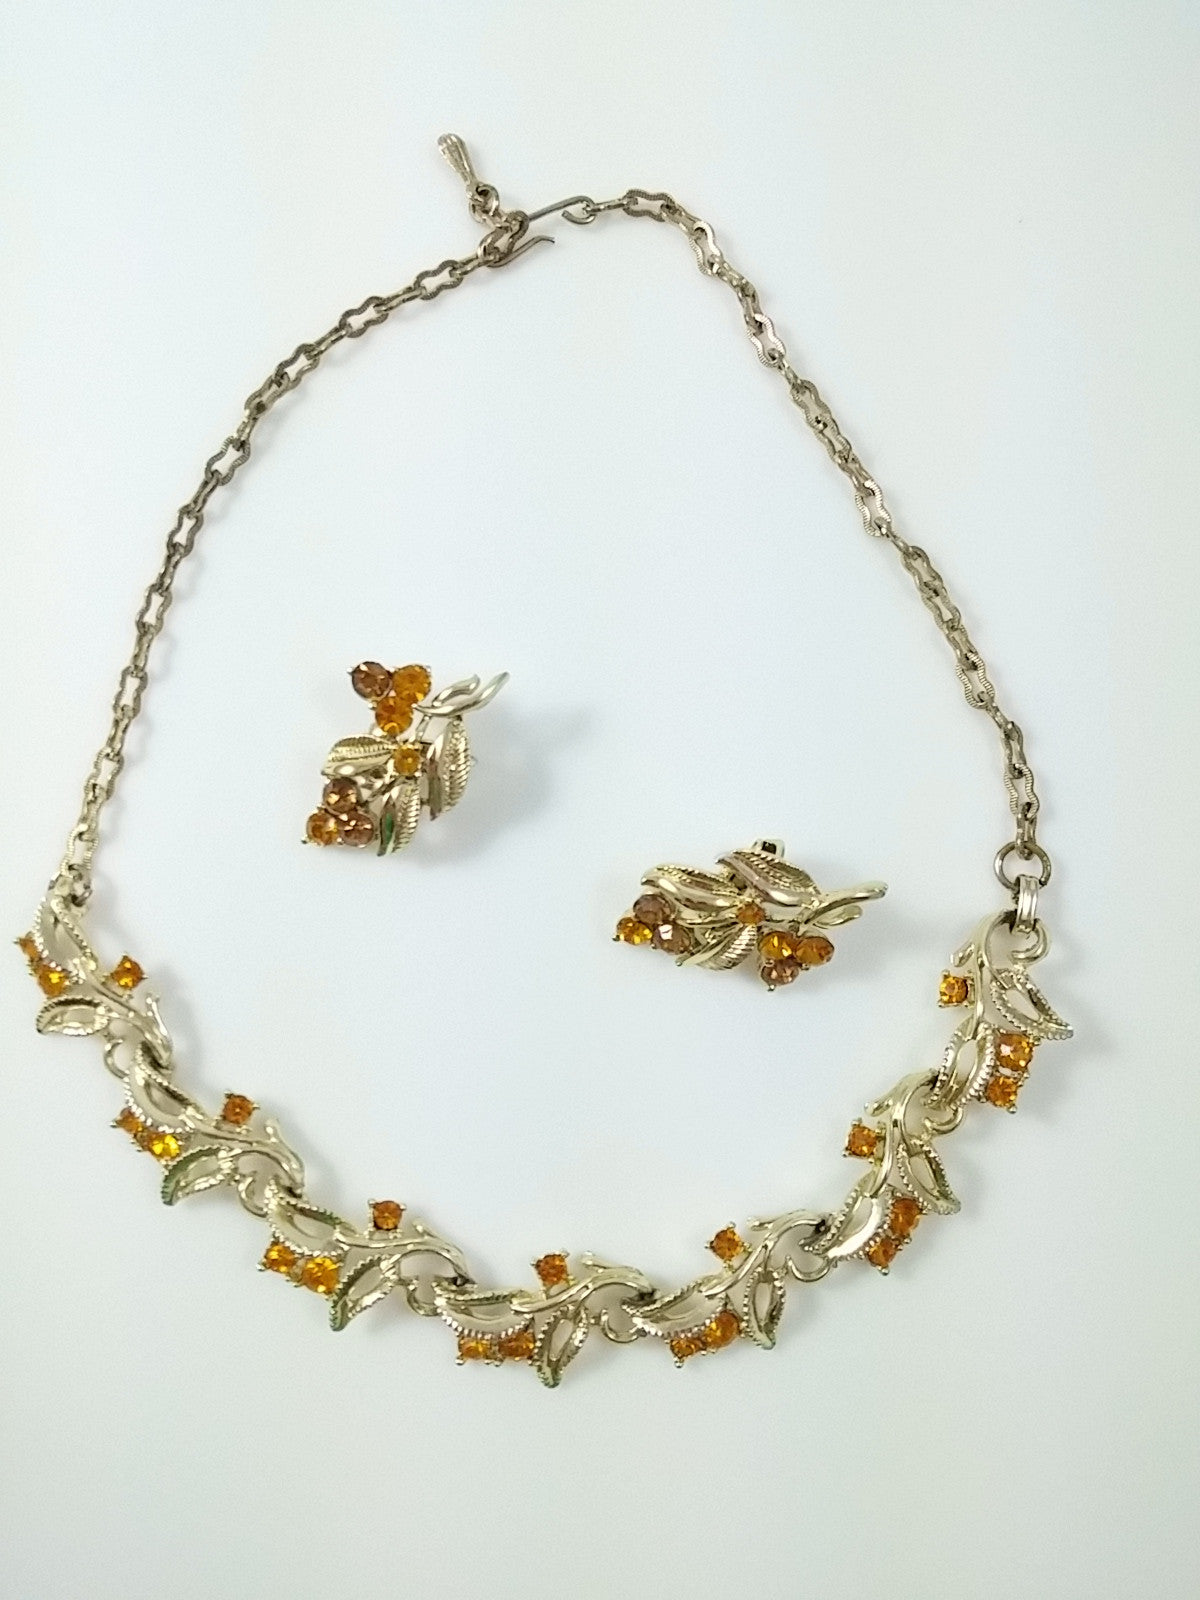 Vintage Coro Necklace and Earring Demi Gold Tone Leaf Clusters w/ Amber Rhinestone Accents - Dirty 30 Vintage